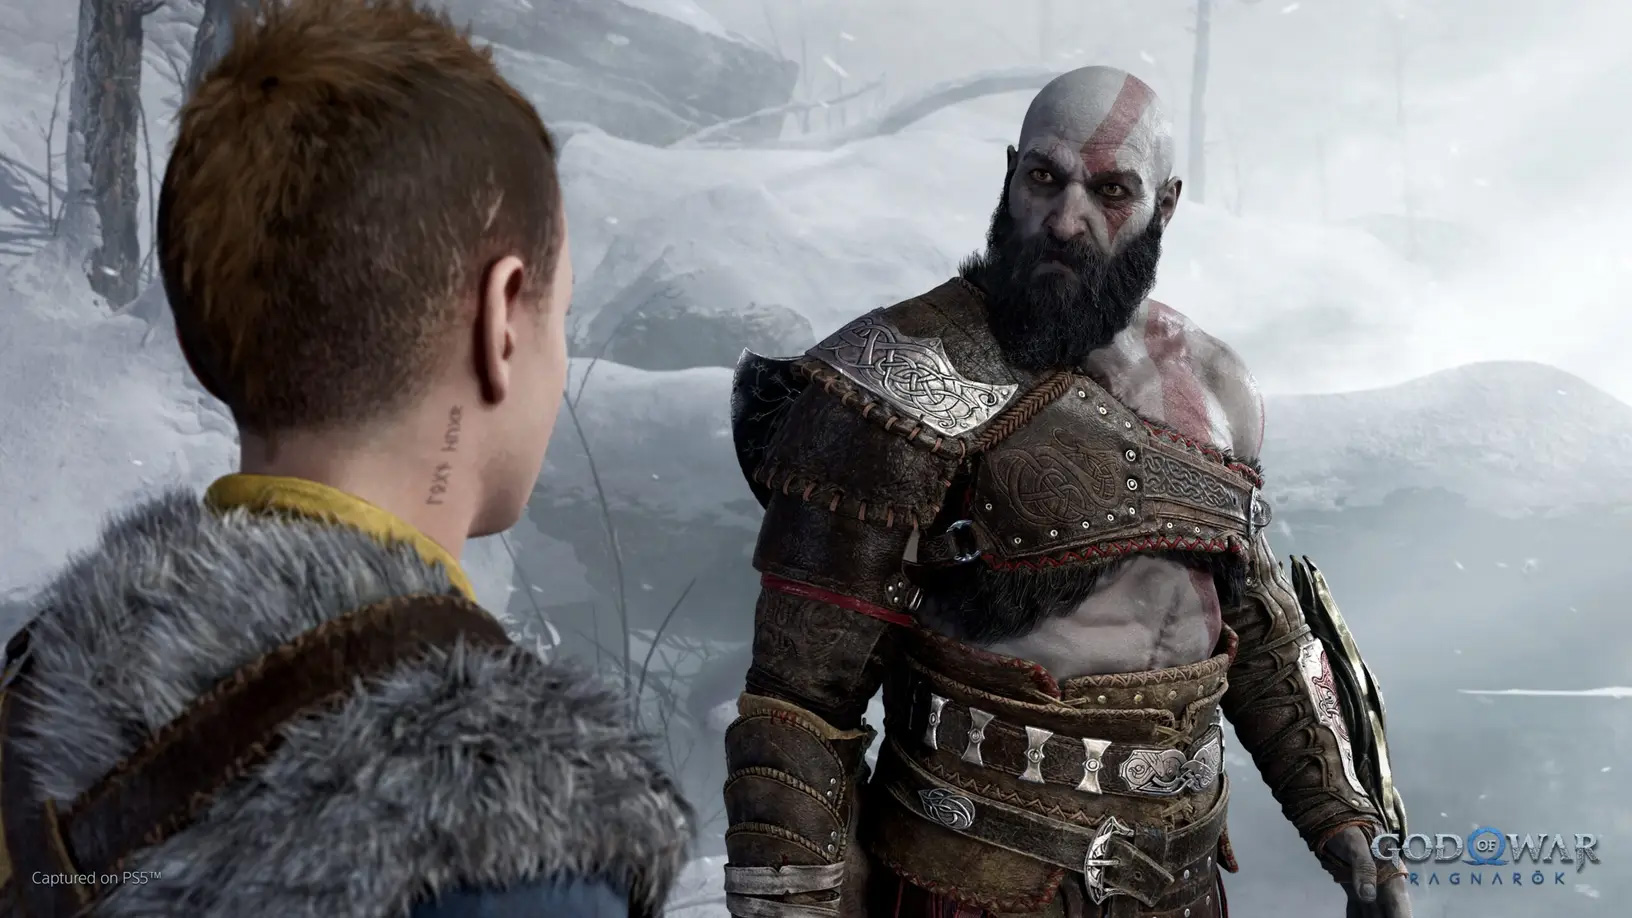 God of War: Ragnarok Drops to Just $35 in This Early Black Friday Deal - IGN